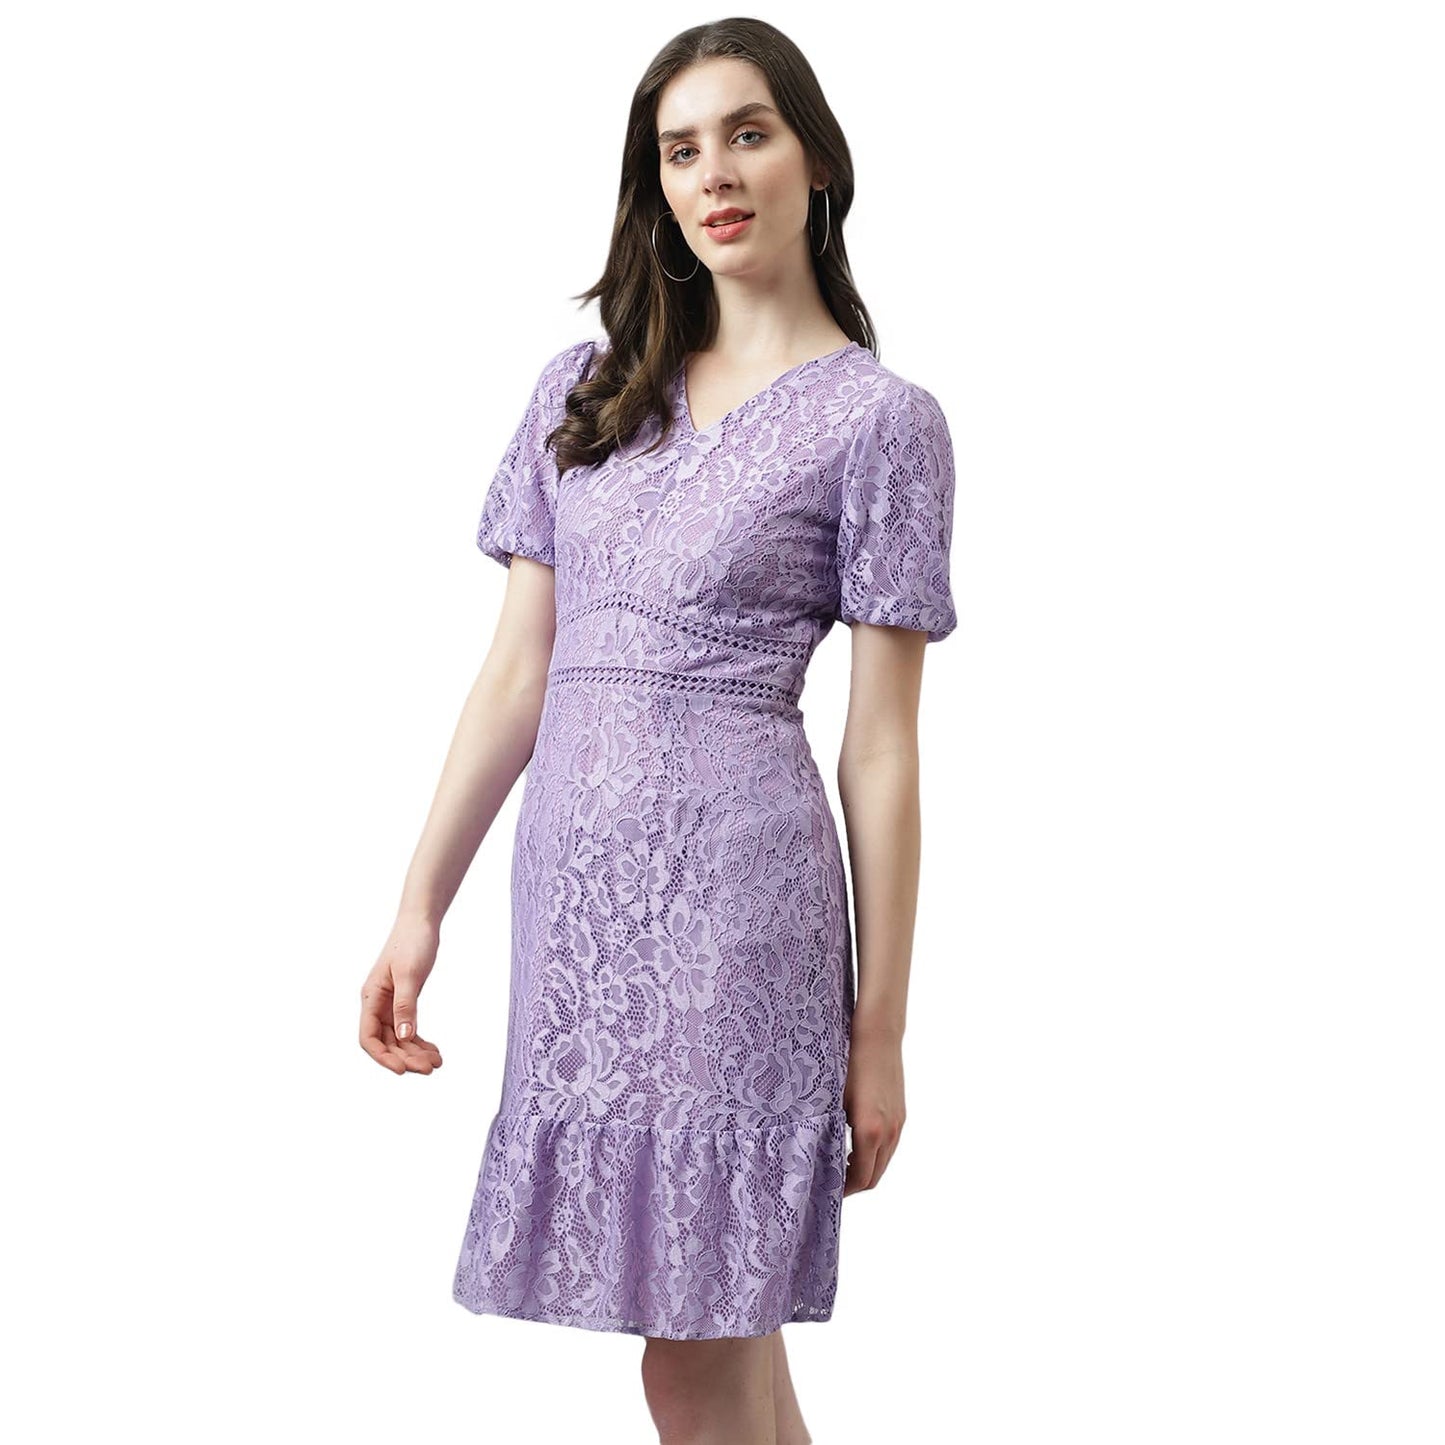 Latin Quarters Women's Lilac Self Design Lace Ruffle Dress with Puffer Sleeves